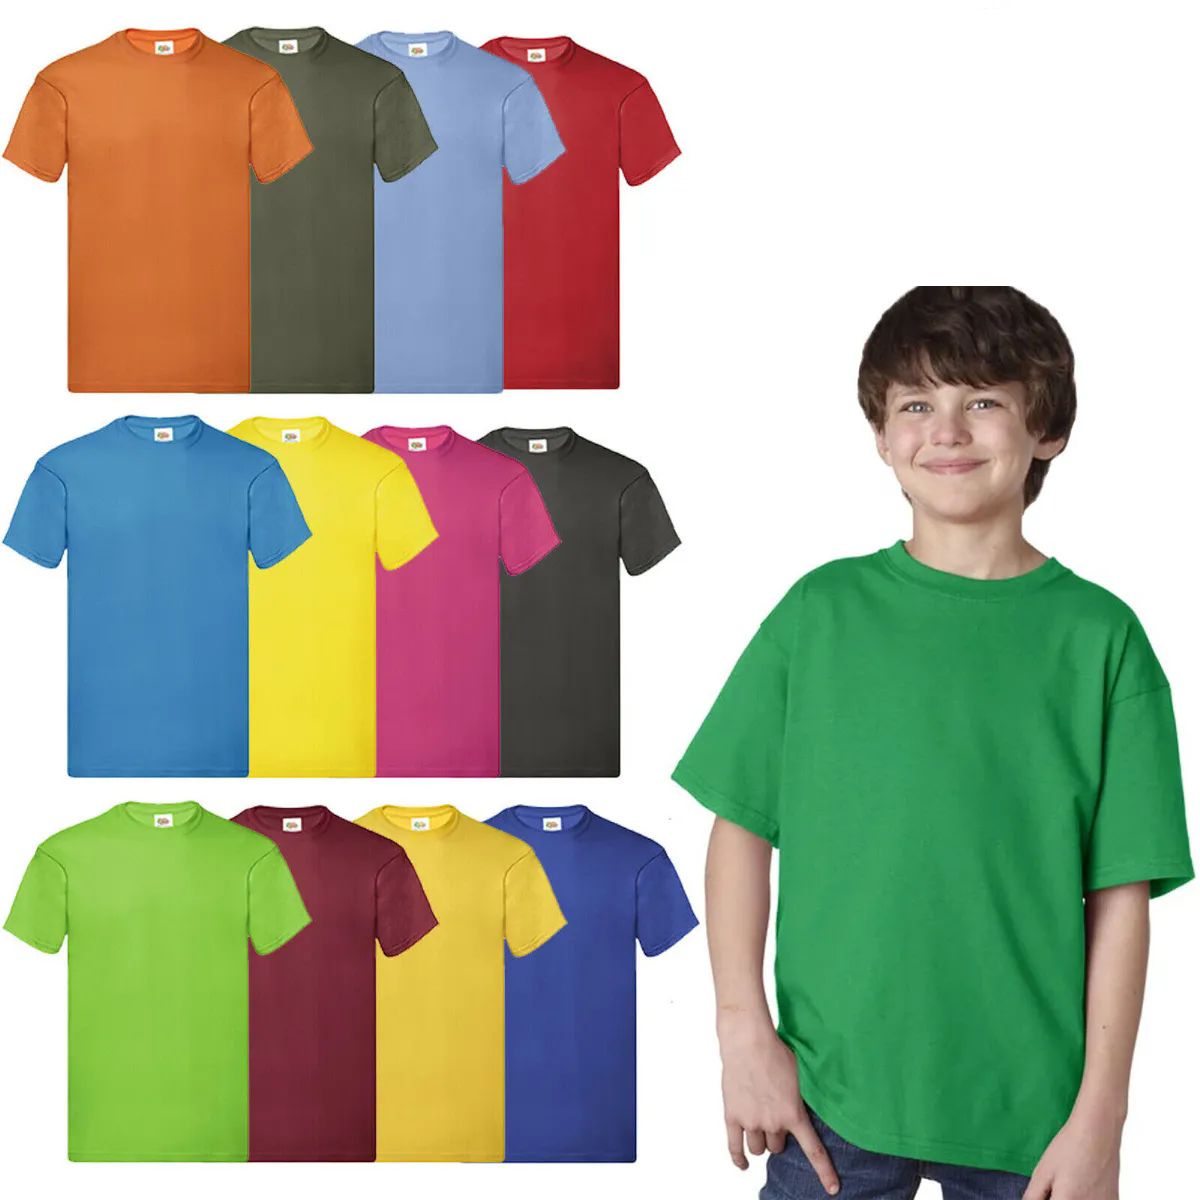 432 Pieces of Billion Hats Kids Youth Cotton Assorted Colors T Shirts Size S